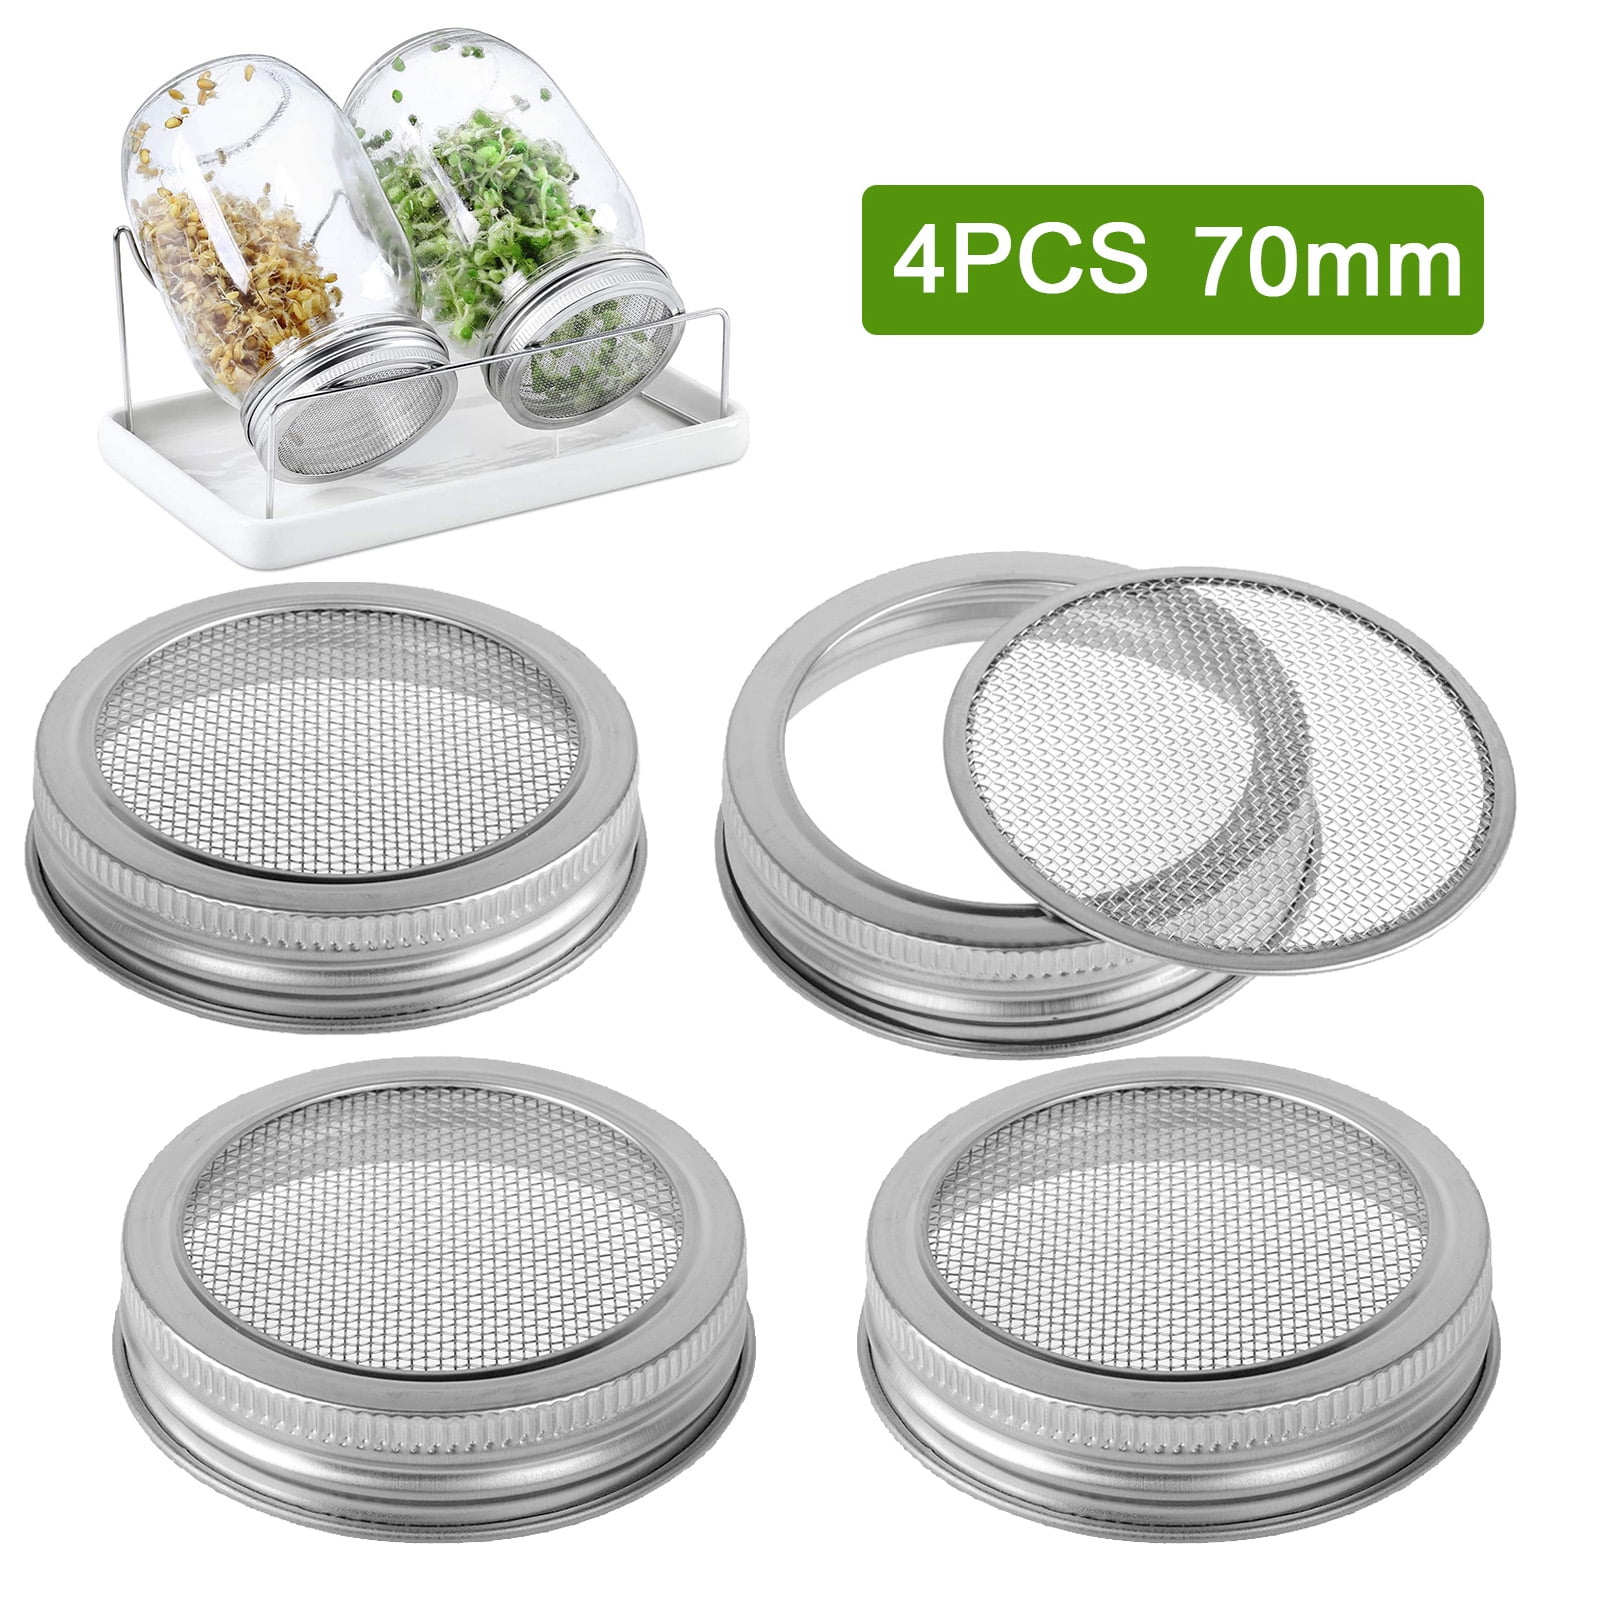 Canning Jars 304 Stainless Steel Sprouting Lids for Wide Mouth 32 Oz Mason Jars OWAY 4 Pack Sprouting Jar Screen Lids Grow Organic Sprouting Seeds at Home